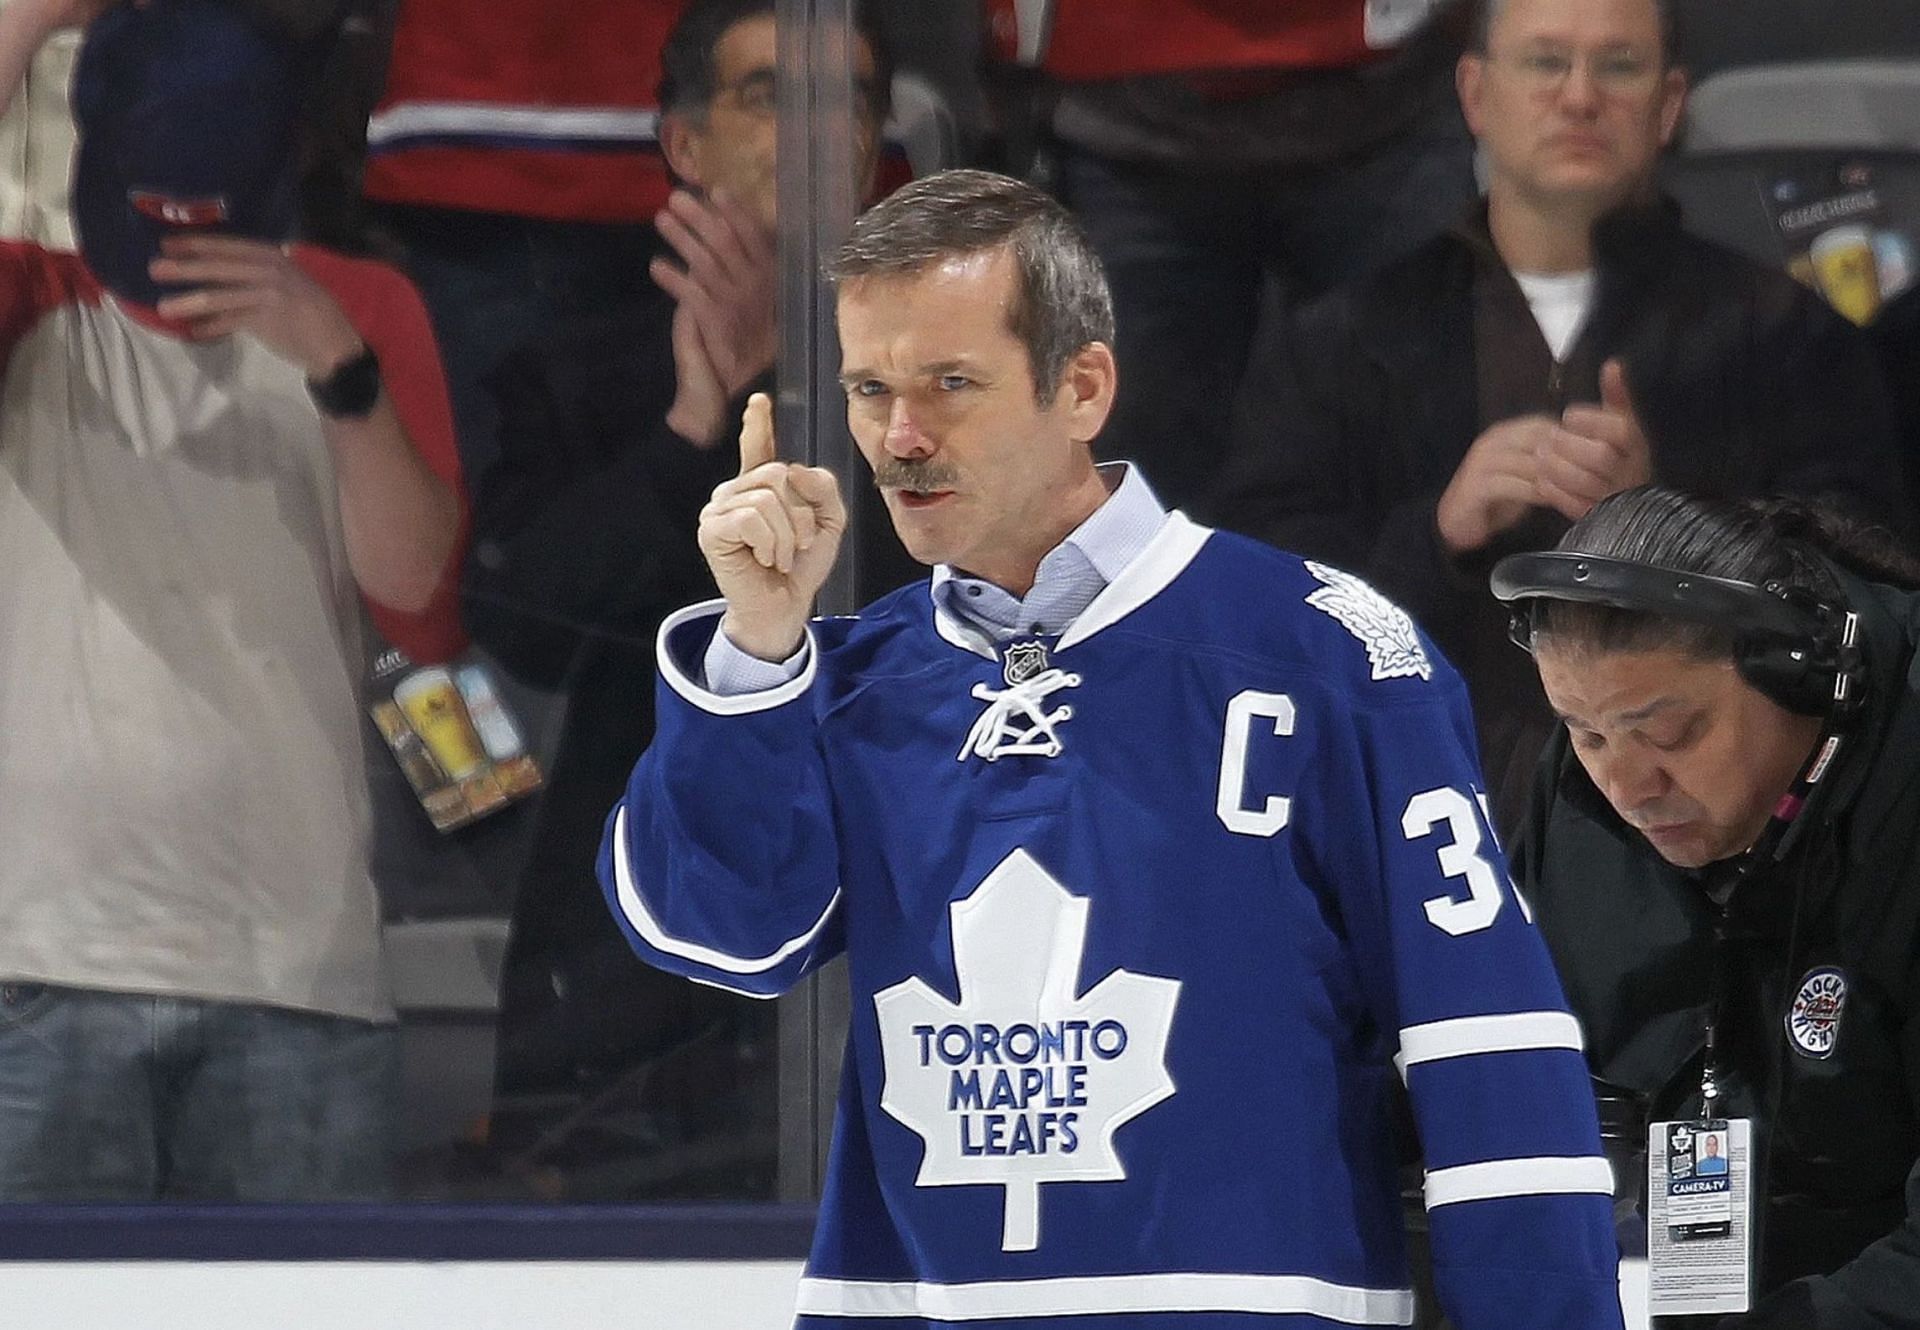 When Chris Hadfield was gutted about Toronto Maple Leafs Game 7 loss to Bruins, right after landing from space